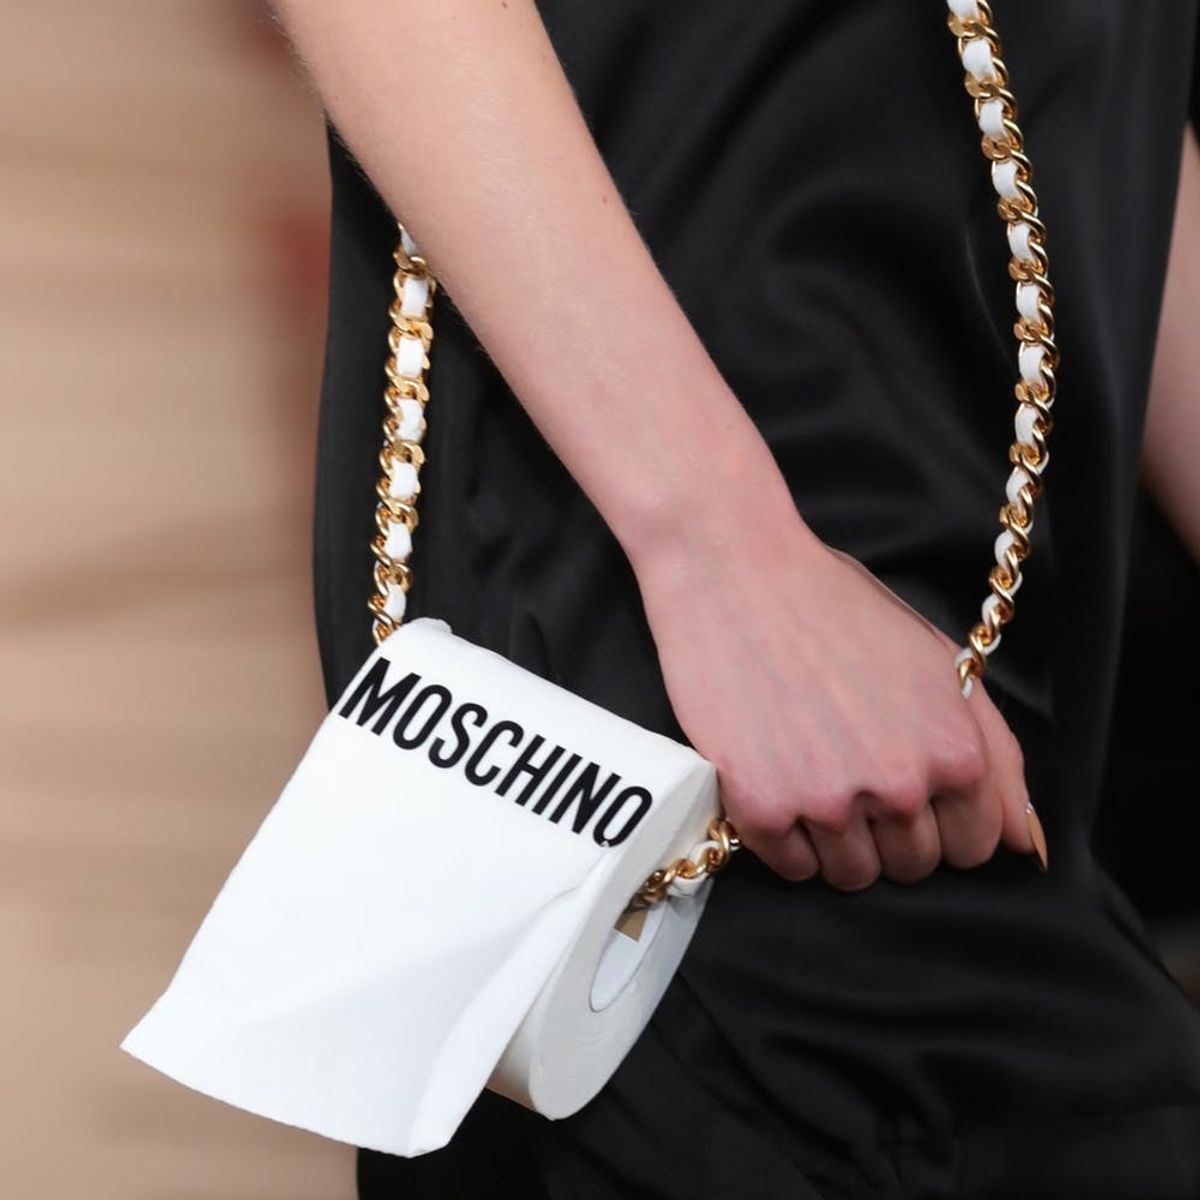 We Can’t Get Over Moschino’s Toilet Paper Purse